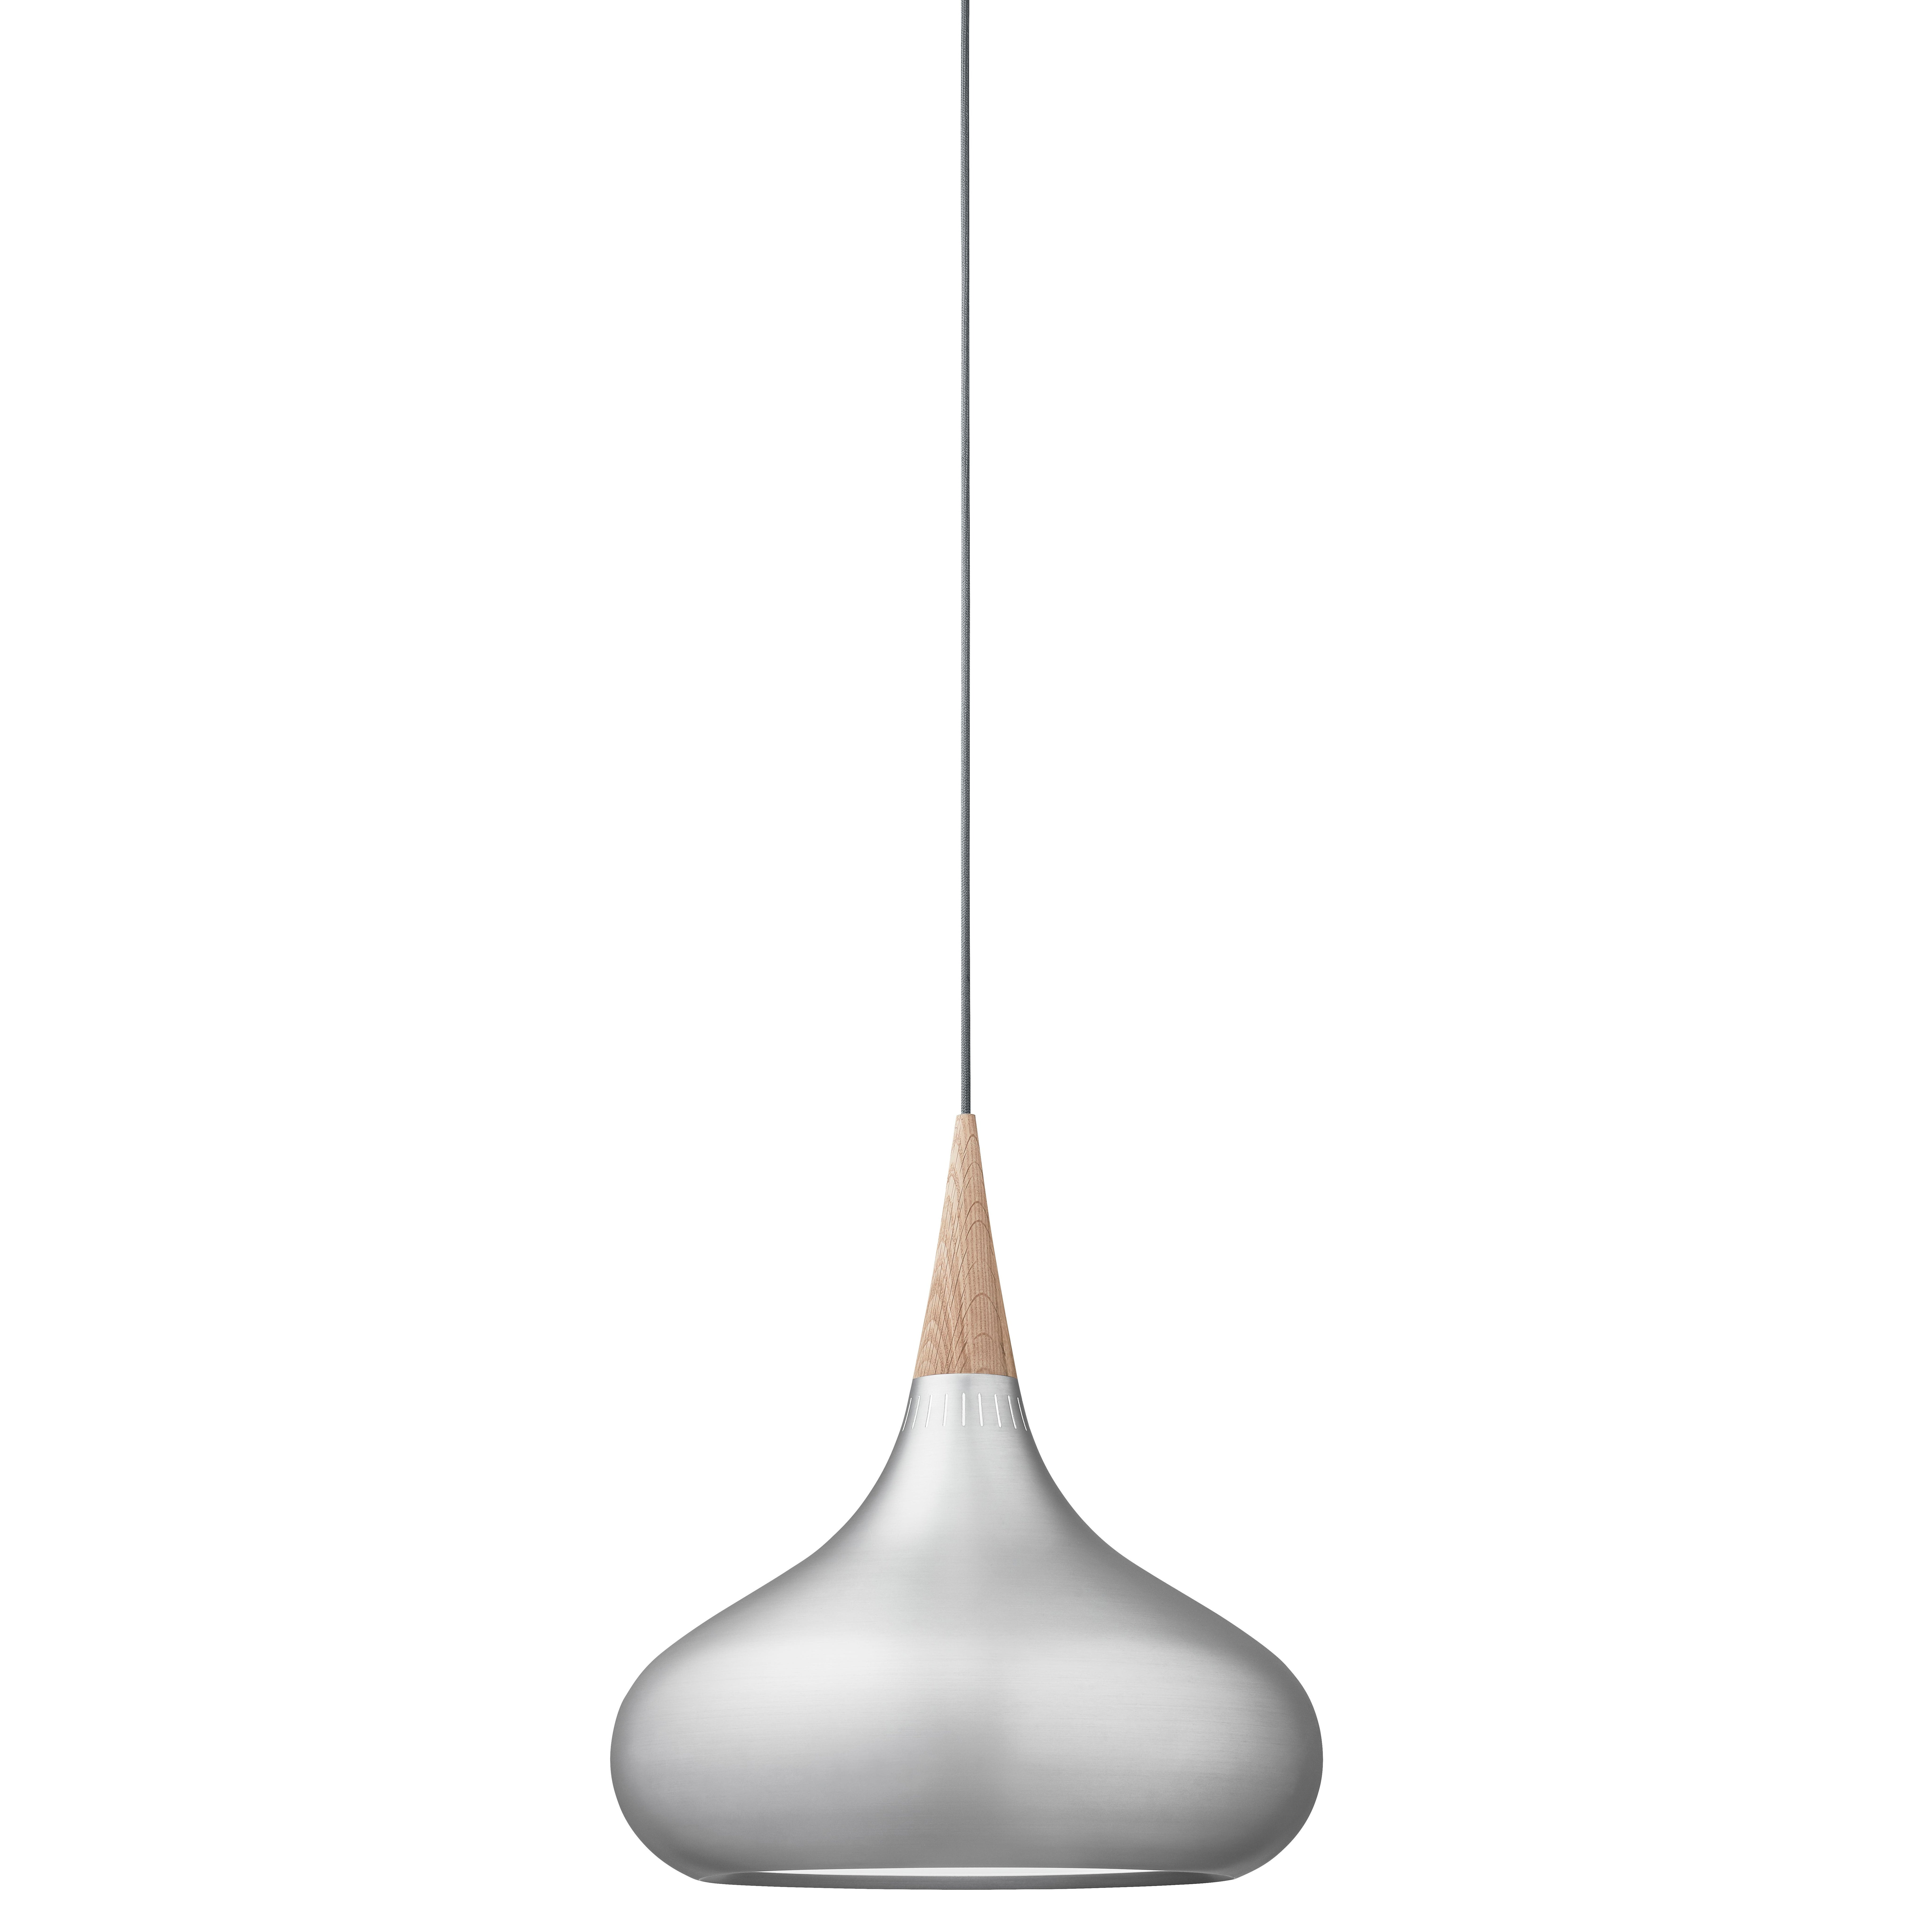 Large Jo Hammerborg 'Orient' Pendant Lamp for Fritz Hansen in Aluminum and Oak In New Condition For Sale In Glendale, CA